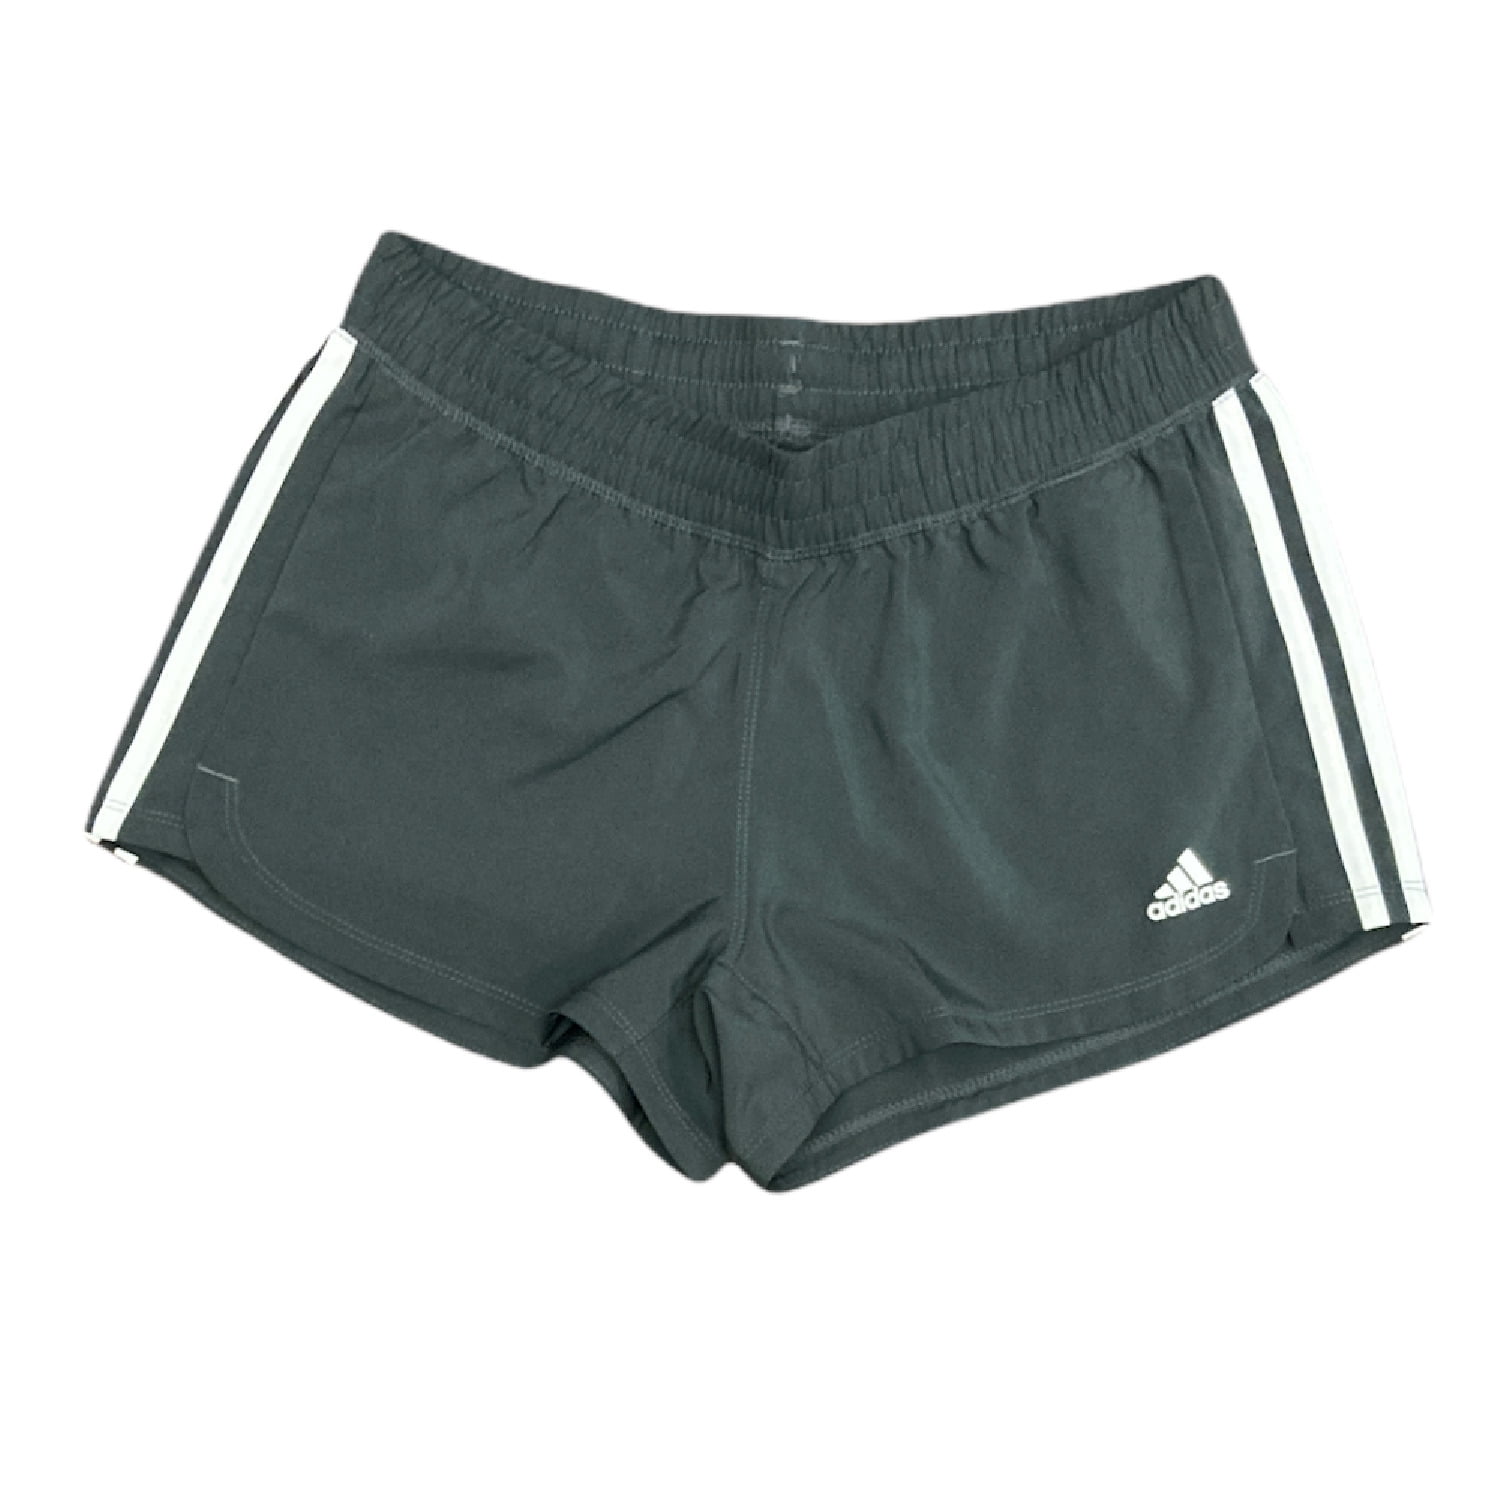 Adidas Women's Pacer 3 Stripe Woven Polyester Gym Shorts (Grey, L) 